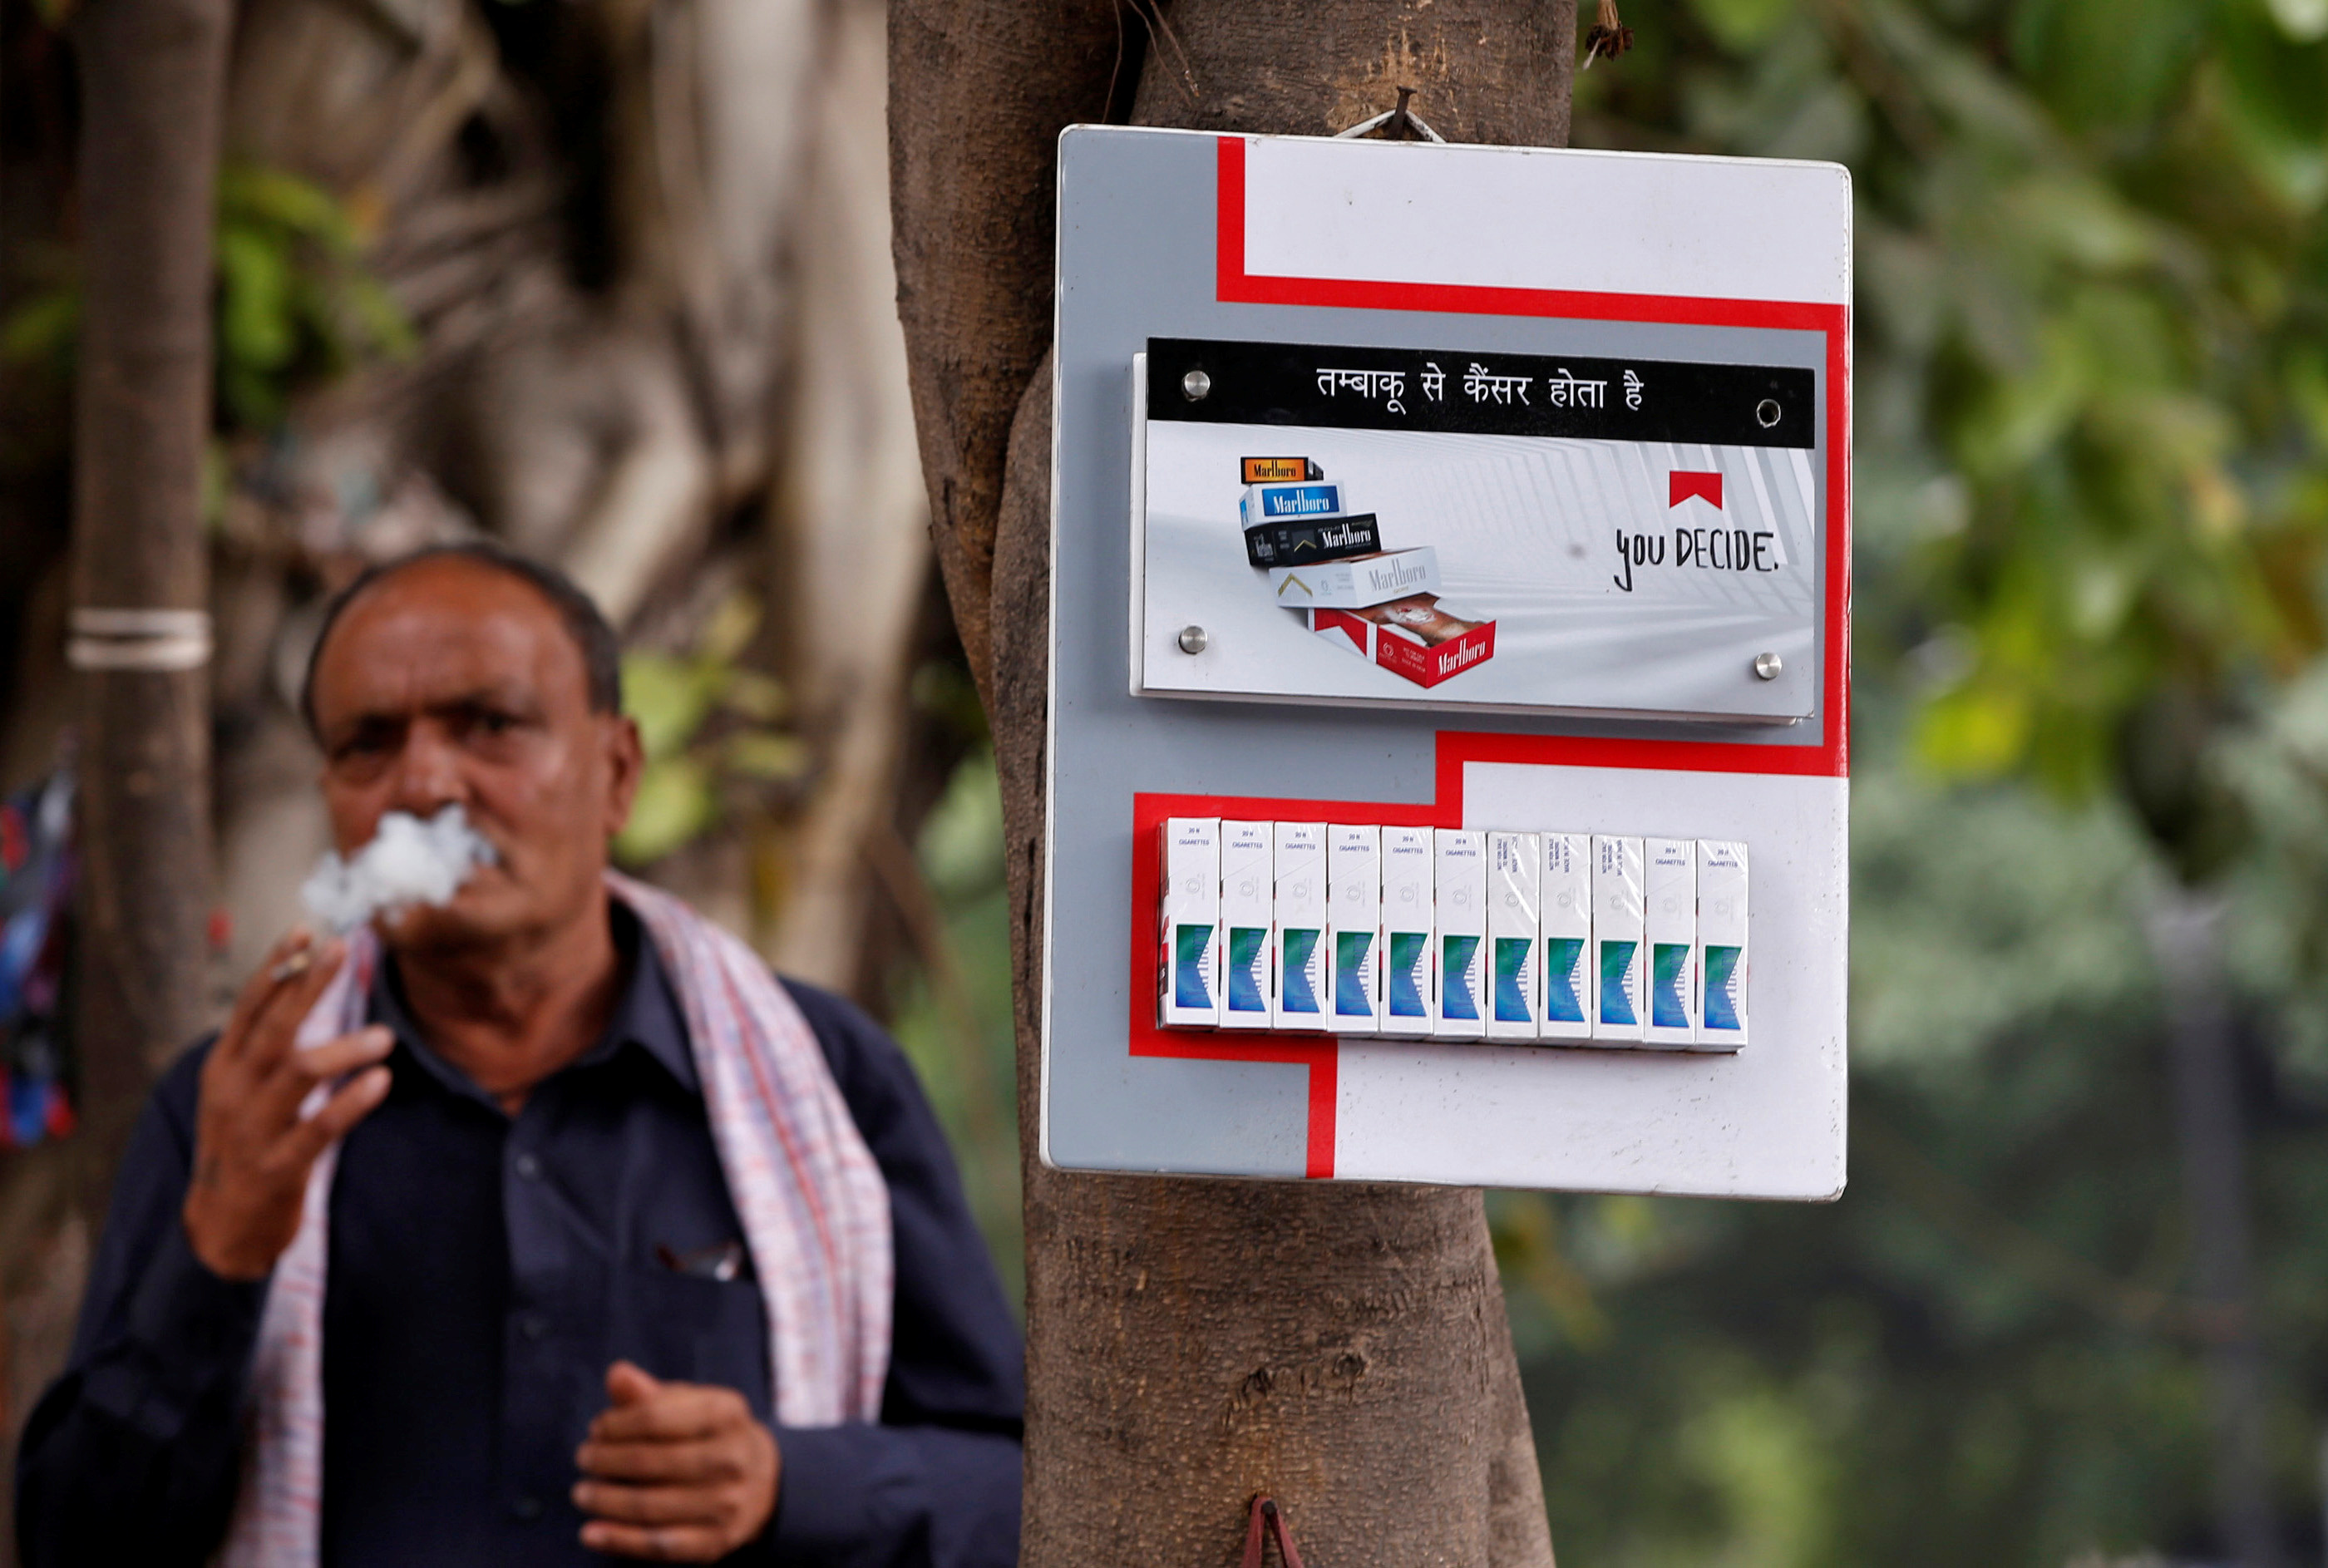 A man smokes next to a cigarette advertisement hung on a tree at a marketplace in New Delhi